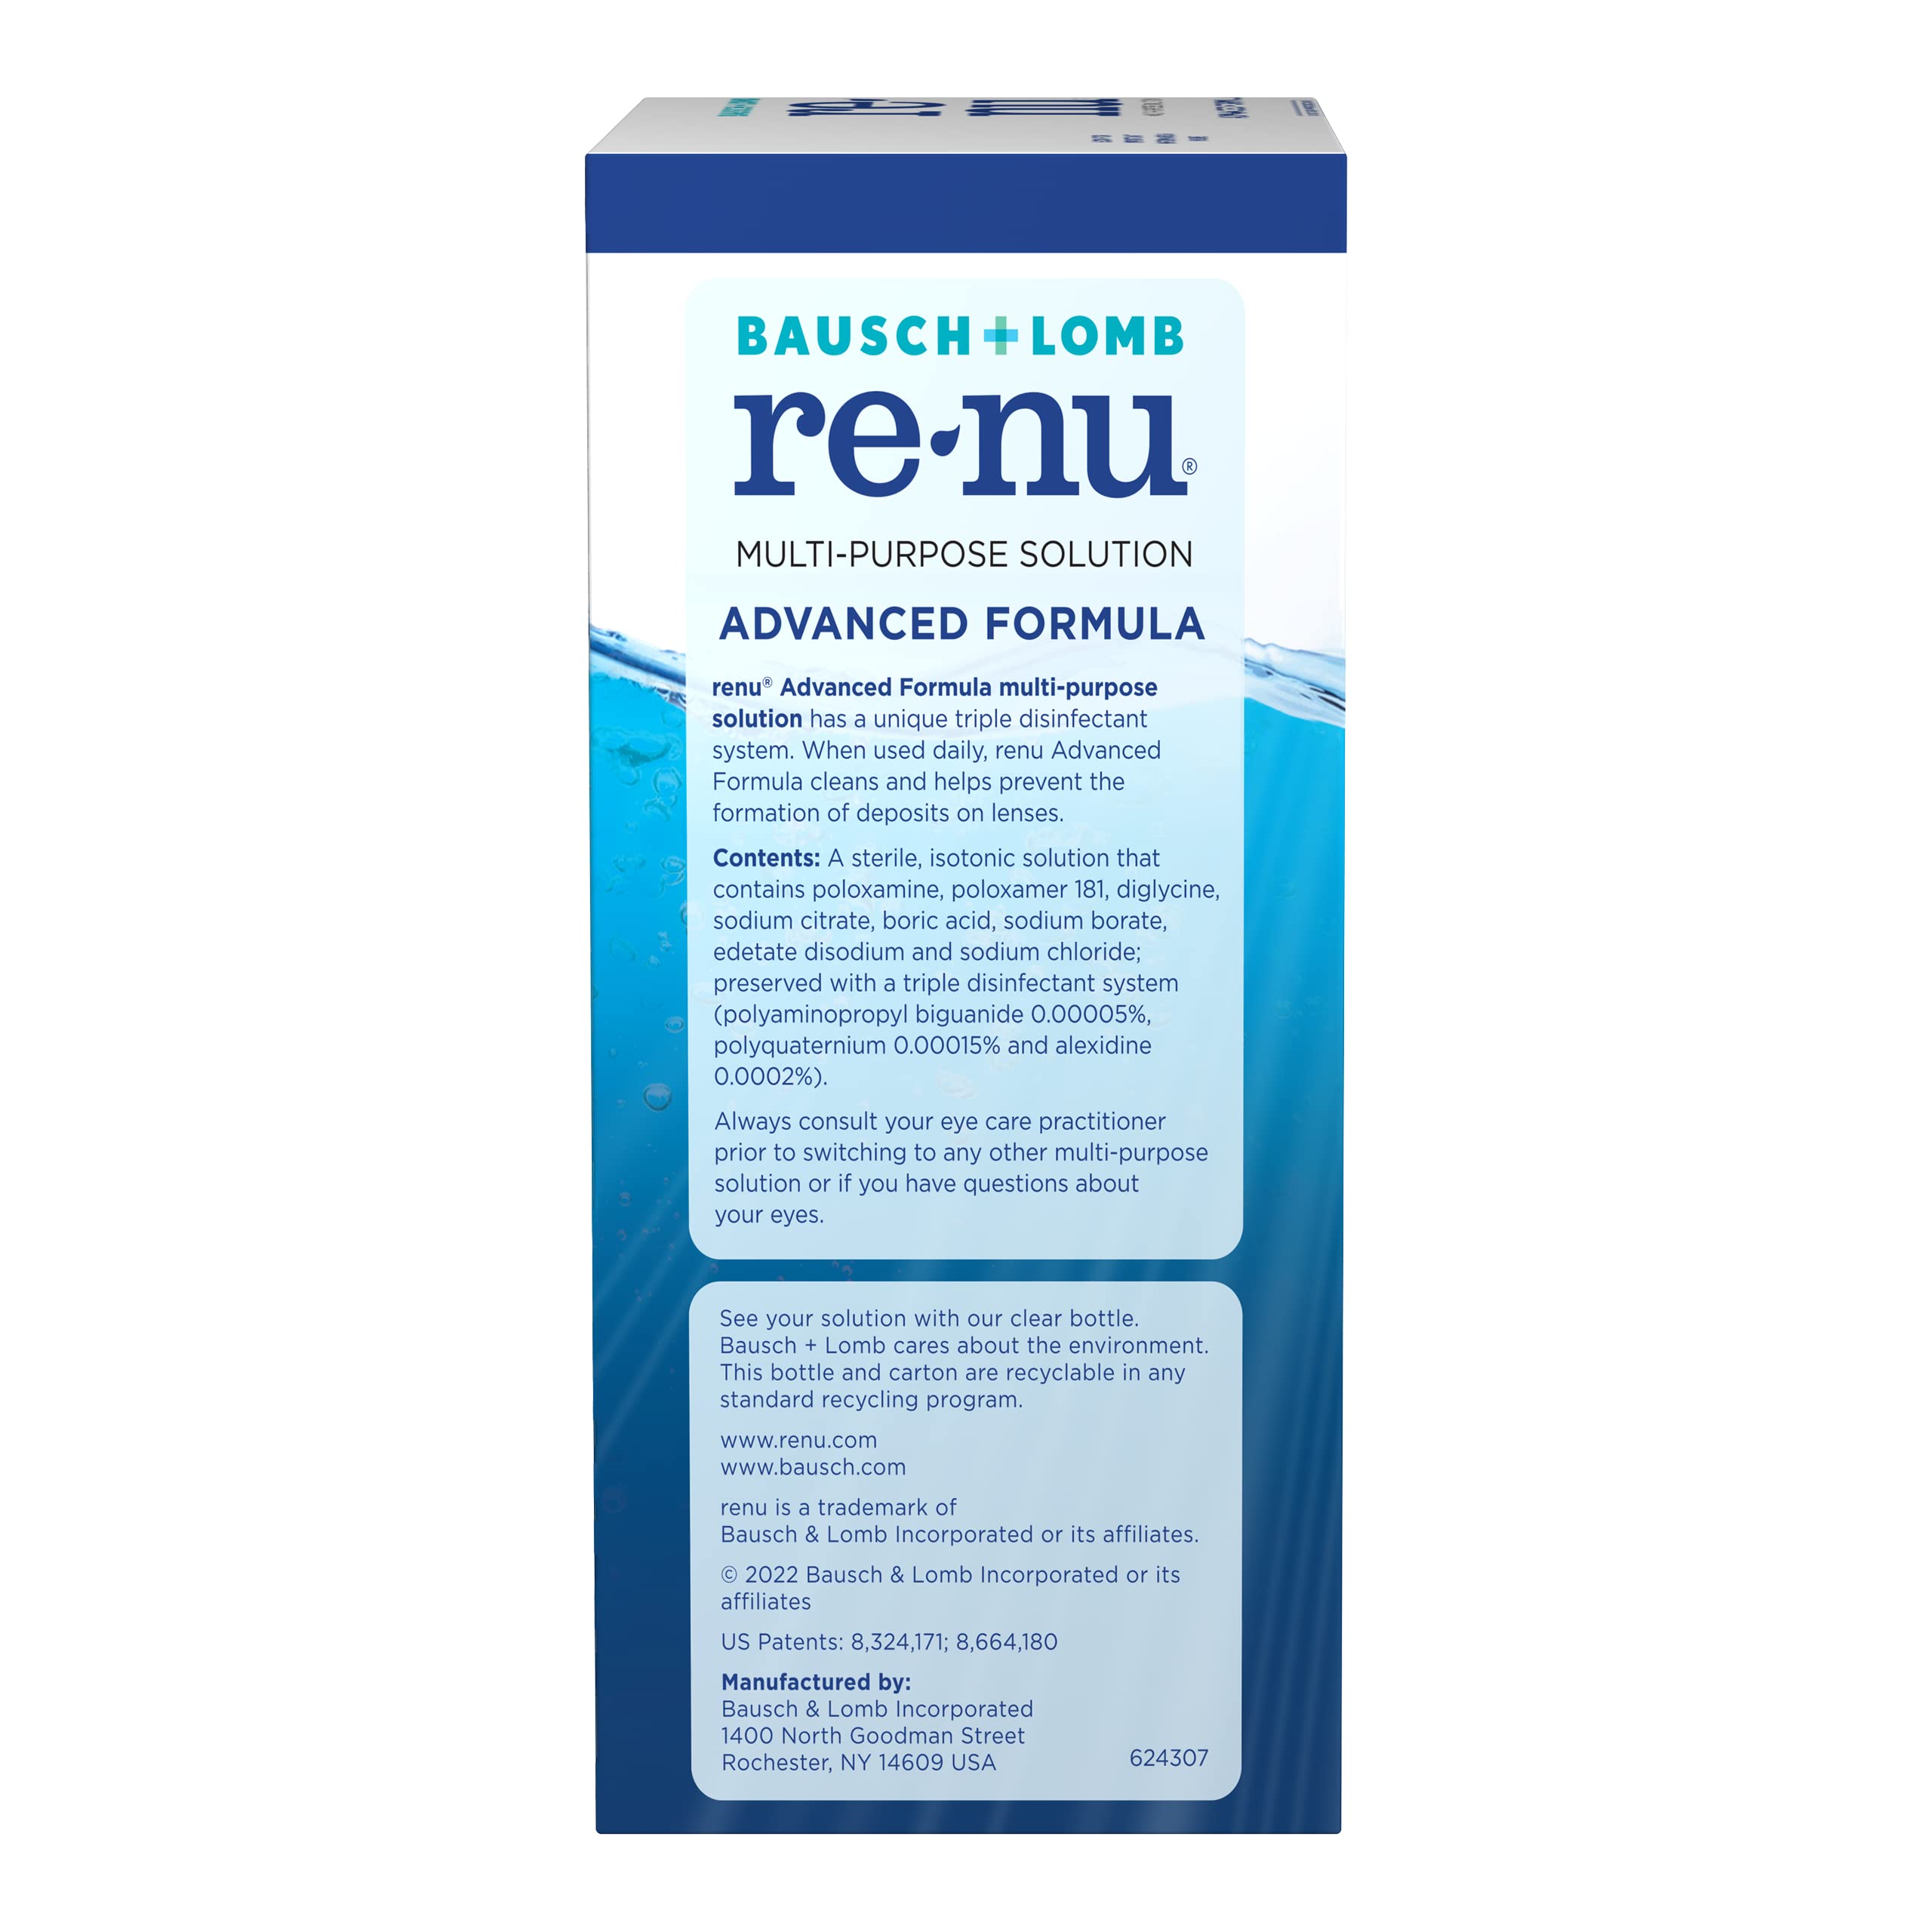 renu Contact Lens Solution, Multi-Purpose Disinfectant, Advanced Formula Kills 99.9% of Germs, 16 Fl Oz (Pack of 2), Includes 2 Fl Oz Travel Size